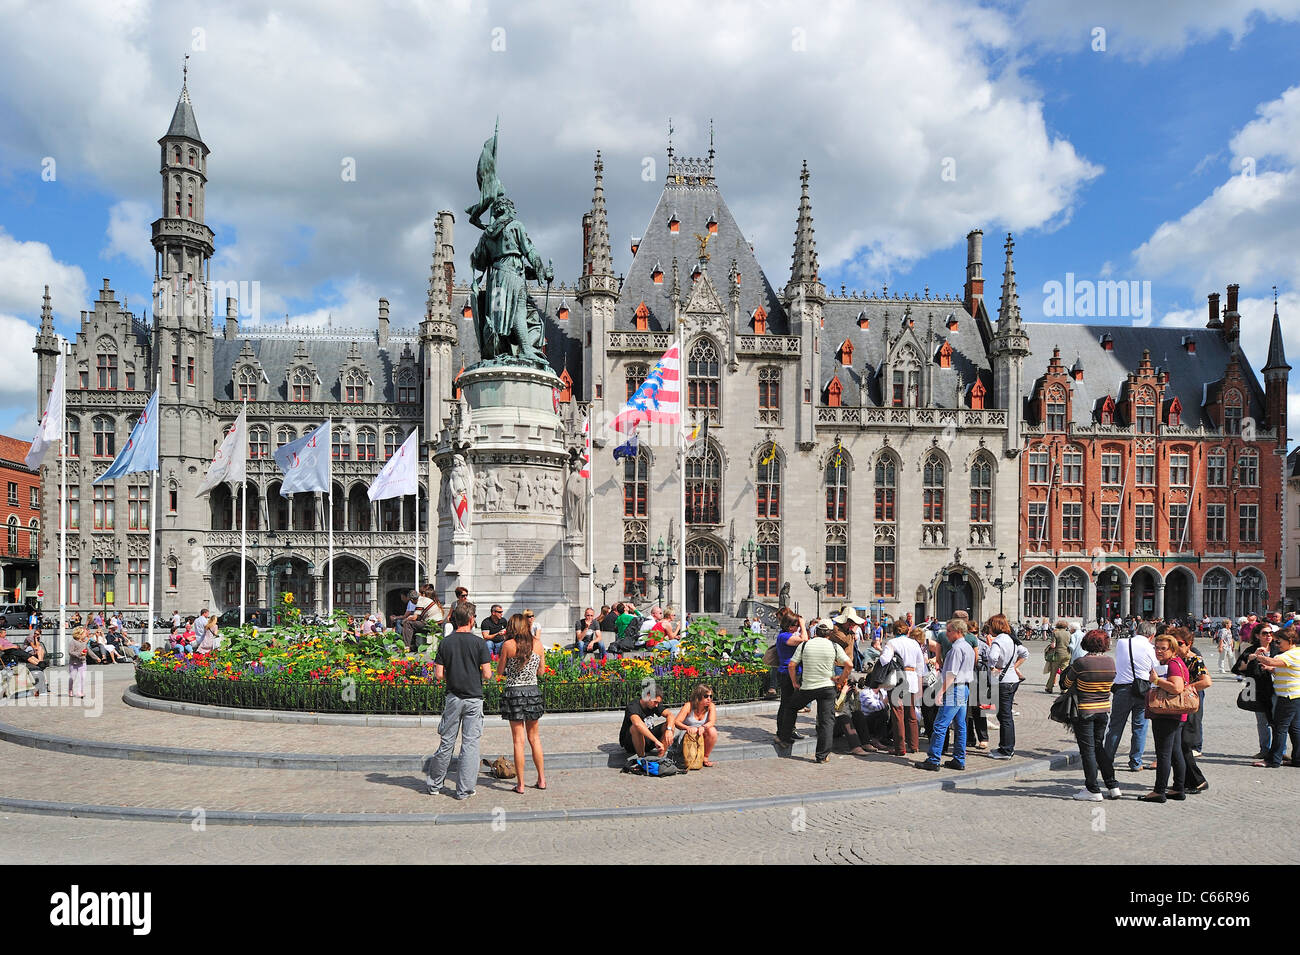 Provincial Court, statue of Jan Breydel and Pieter De Coninck and tourists at the Market square / Grote Markt in Bruges, Belgium Stock Photo